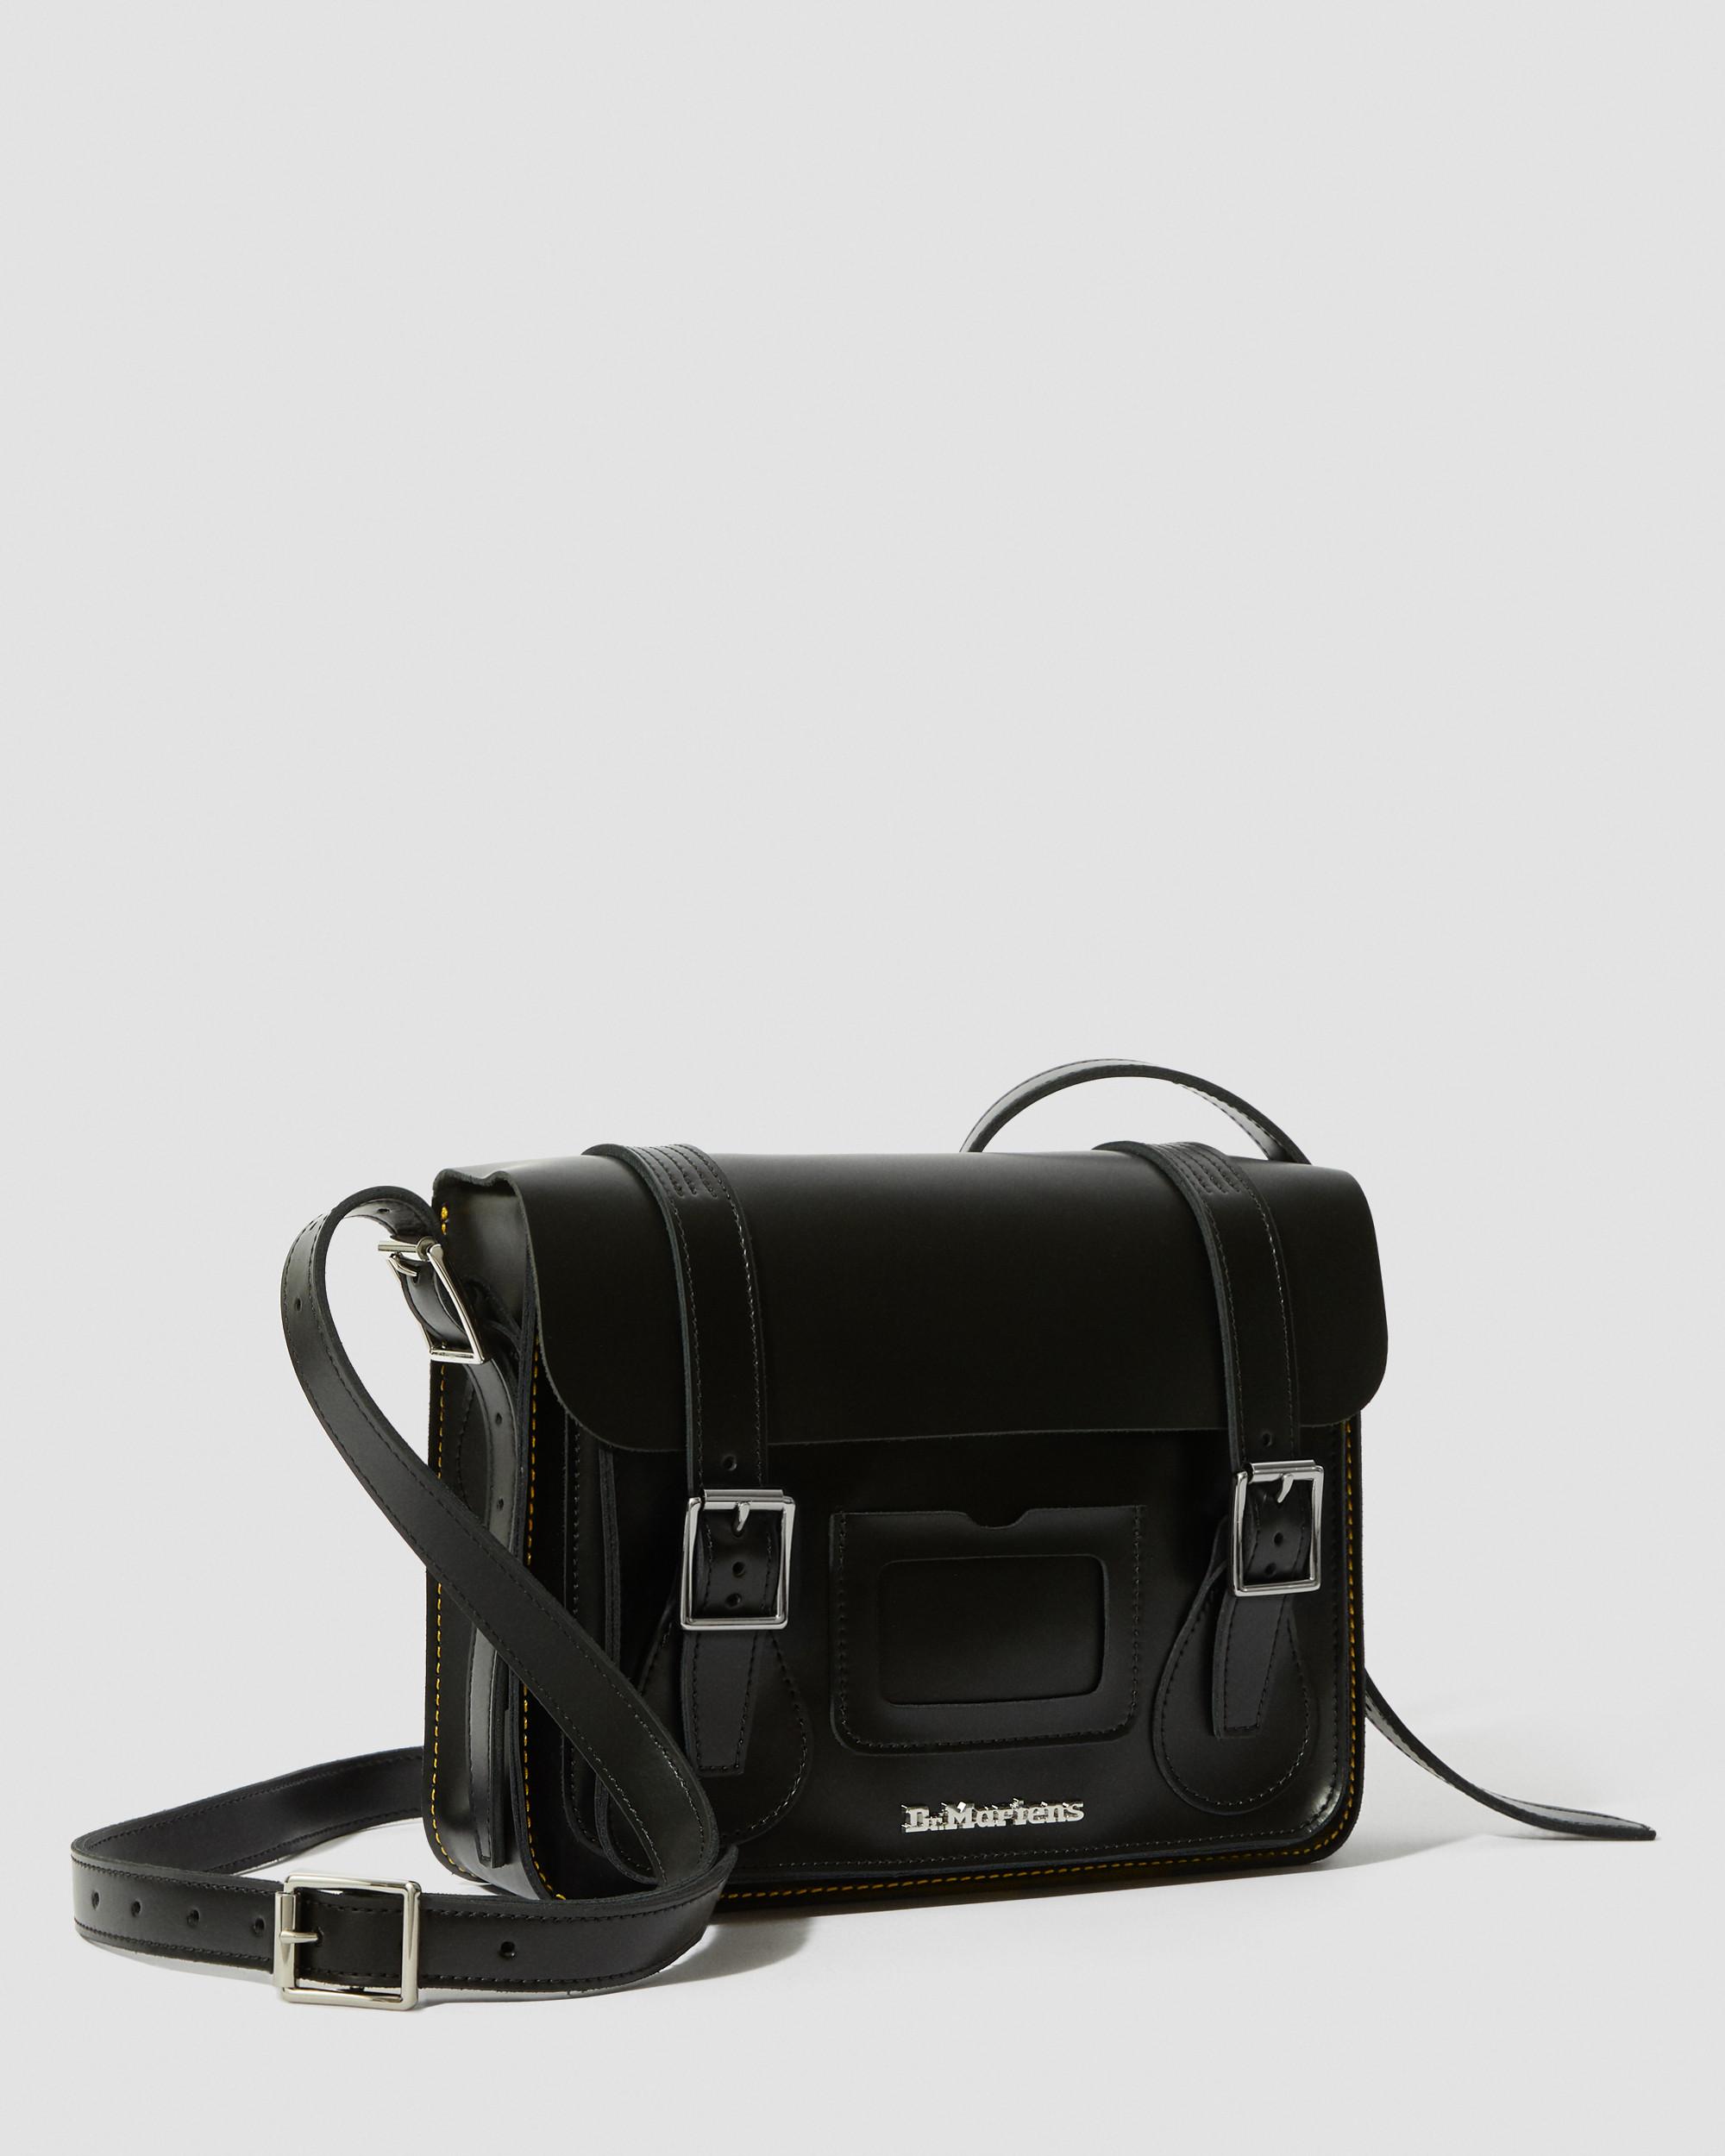 DR MARTENS 7 inch Patent Leather Crossbody Bag